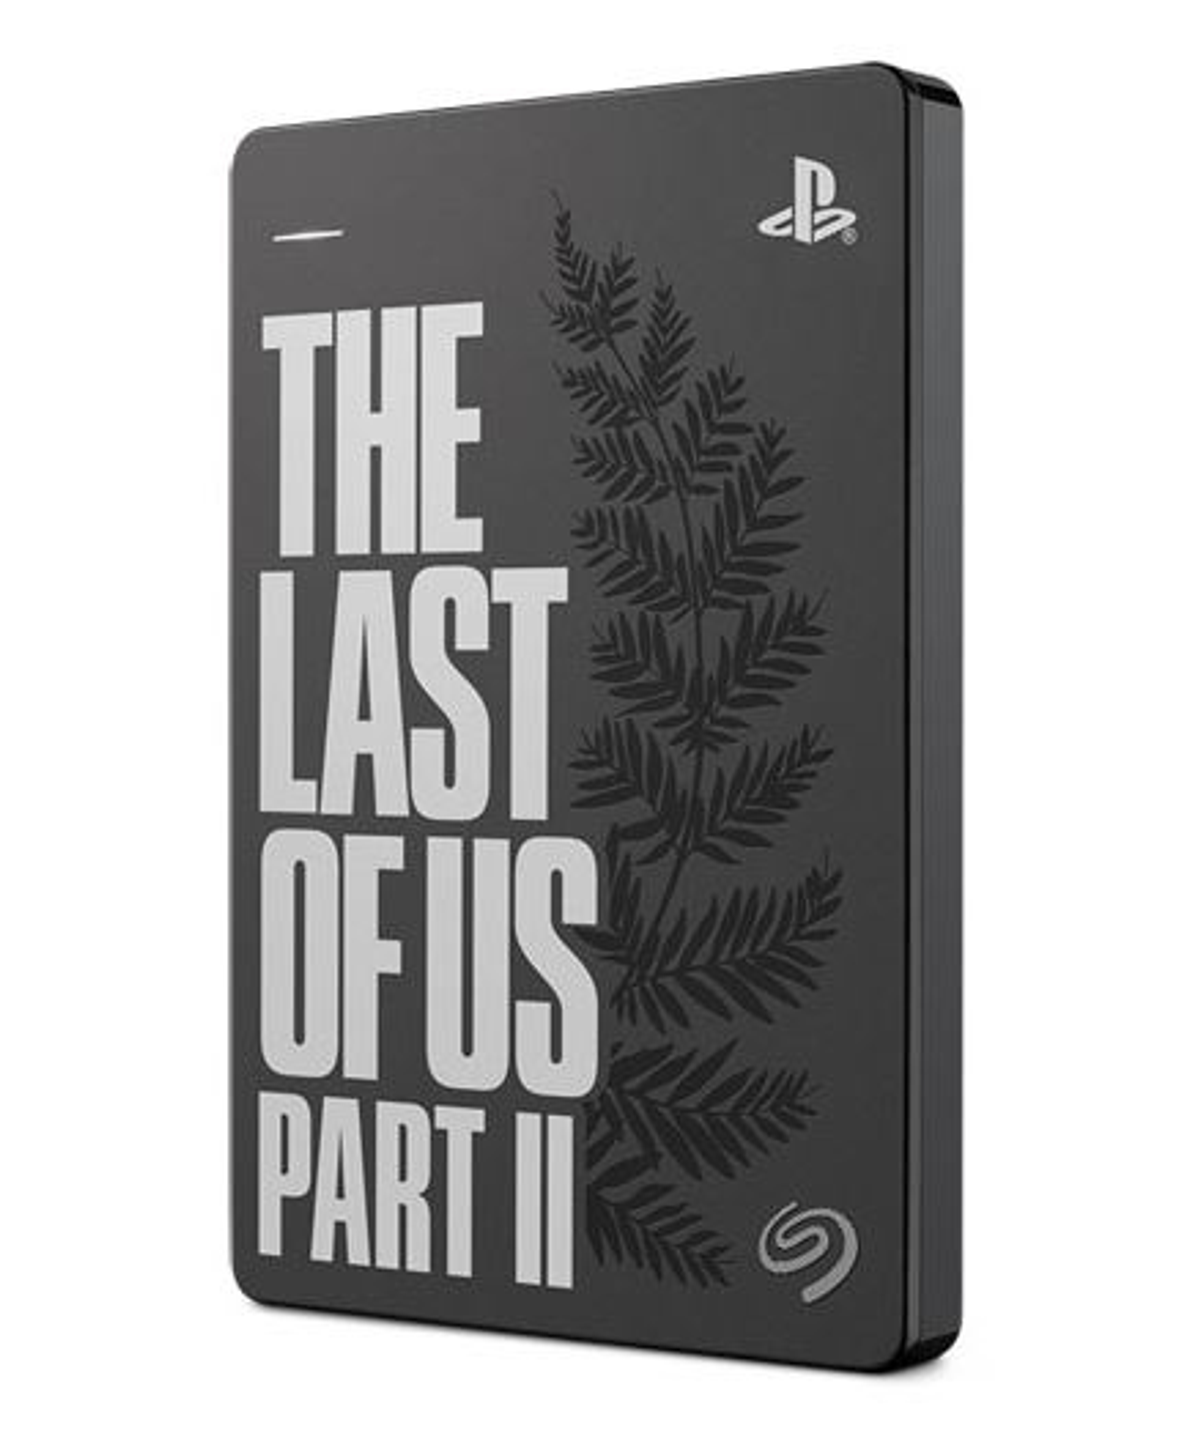 Disco Duro Externo seagate game drive the last of part ii limitada 2.5 microusb b hdd stgd2000202 2000 gb gris 2tb 2 edition ps4 usb 3.0 ps5 stgd2000103